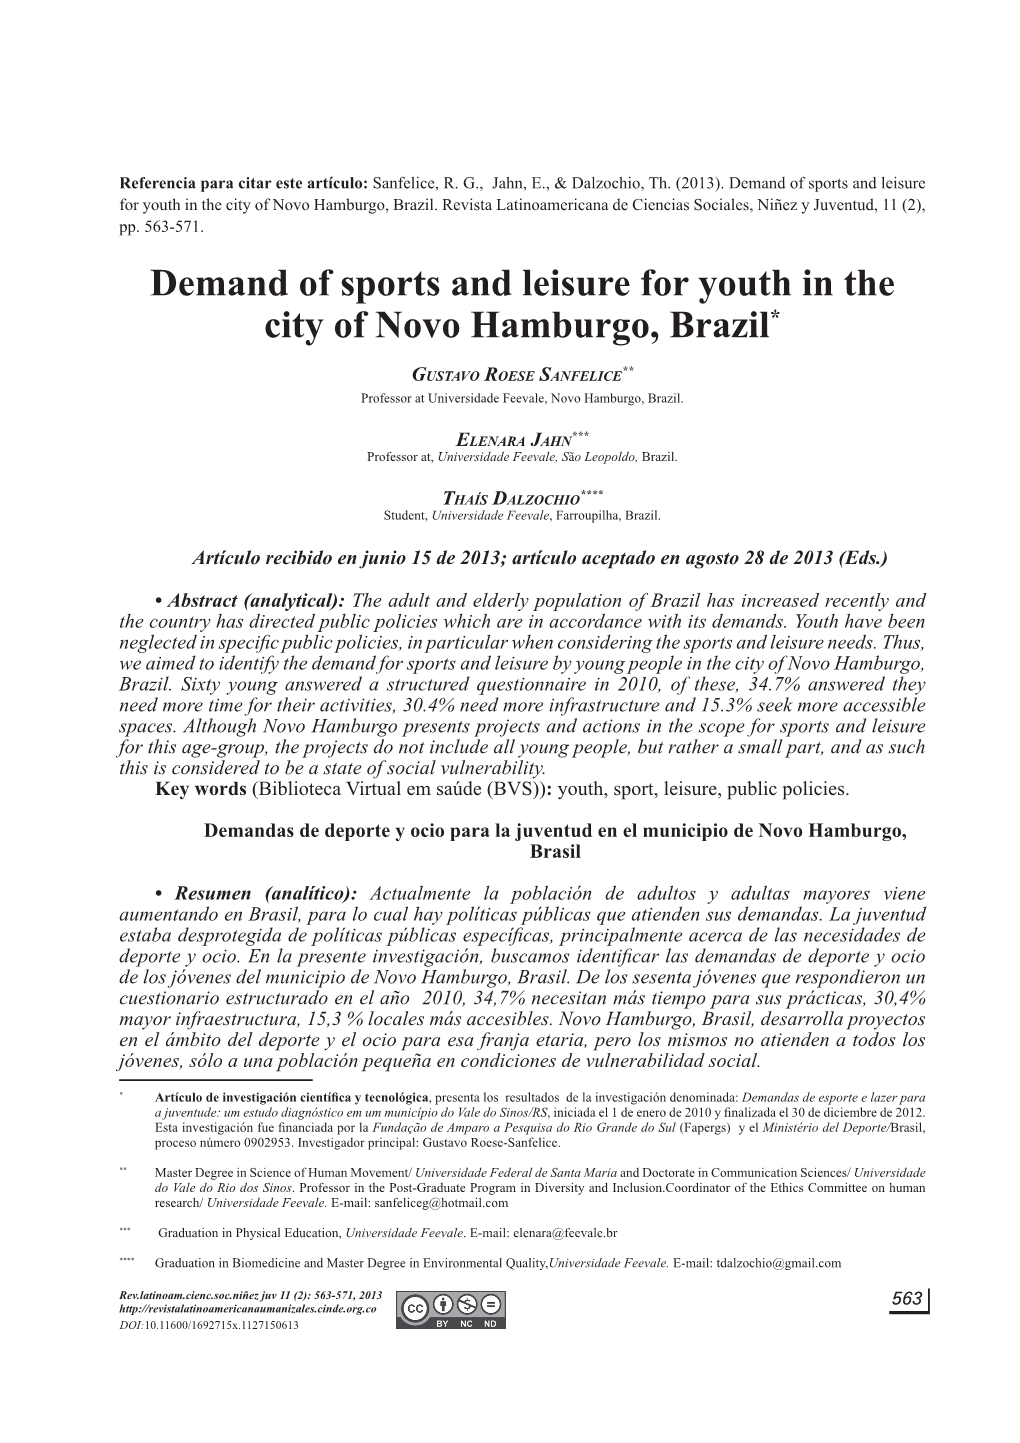 Demand of Sports and Leisure for Youth in the City of Novo Hamburgo, Brazil*